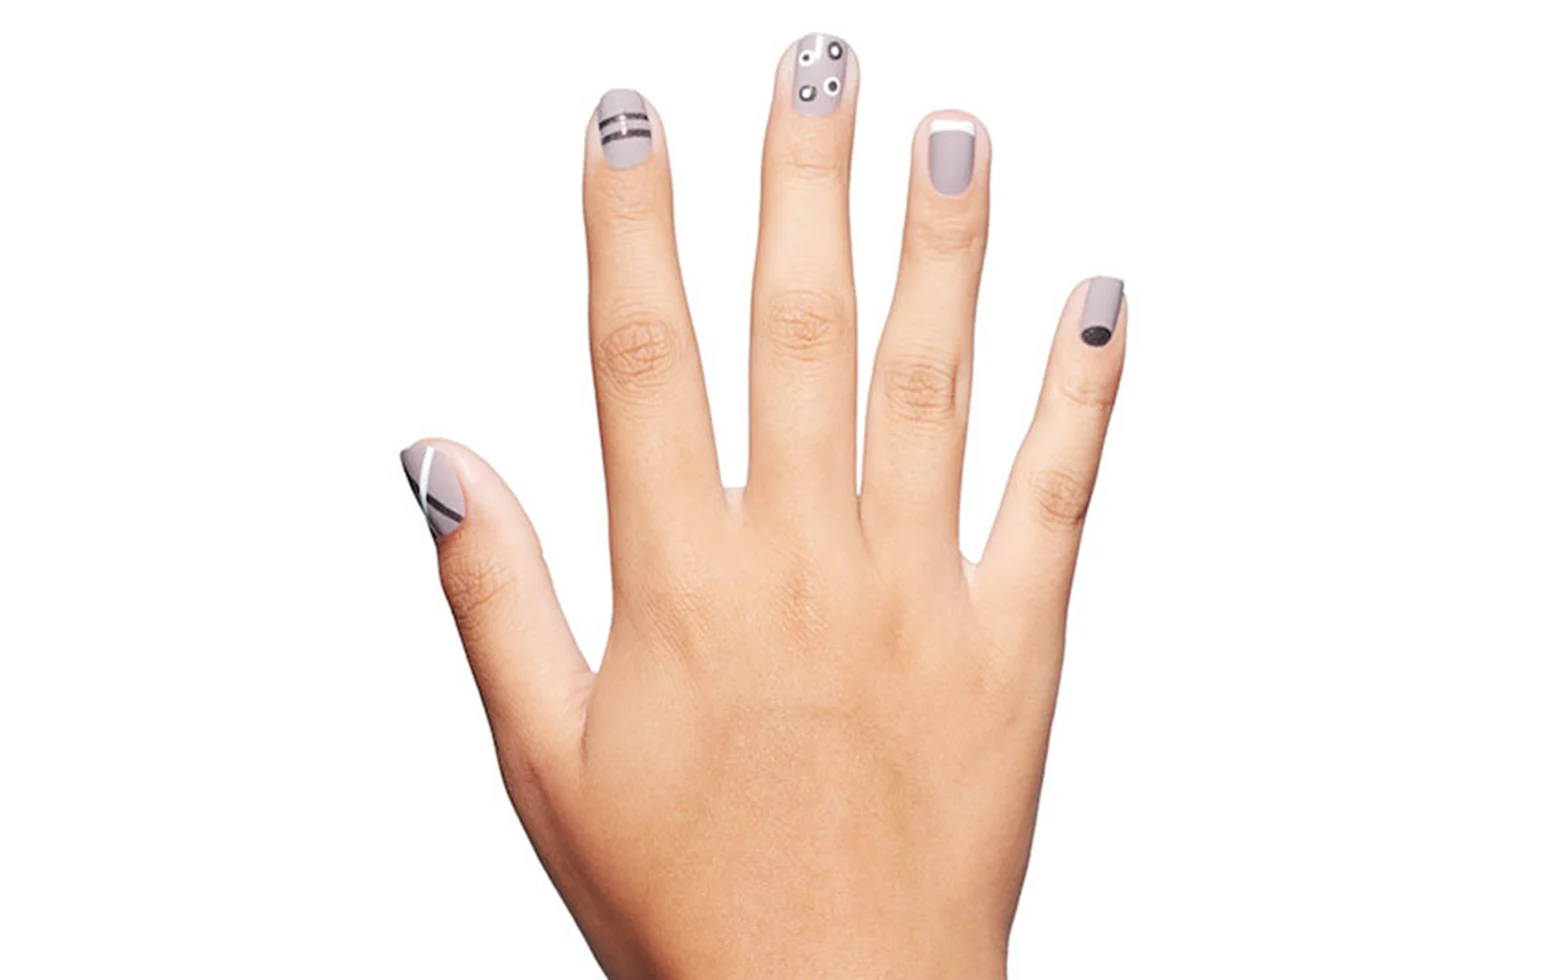 2. 10 Simple Nail Art Designs You Can Do in 1 Hour - wide 4